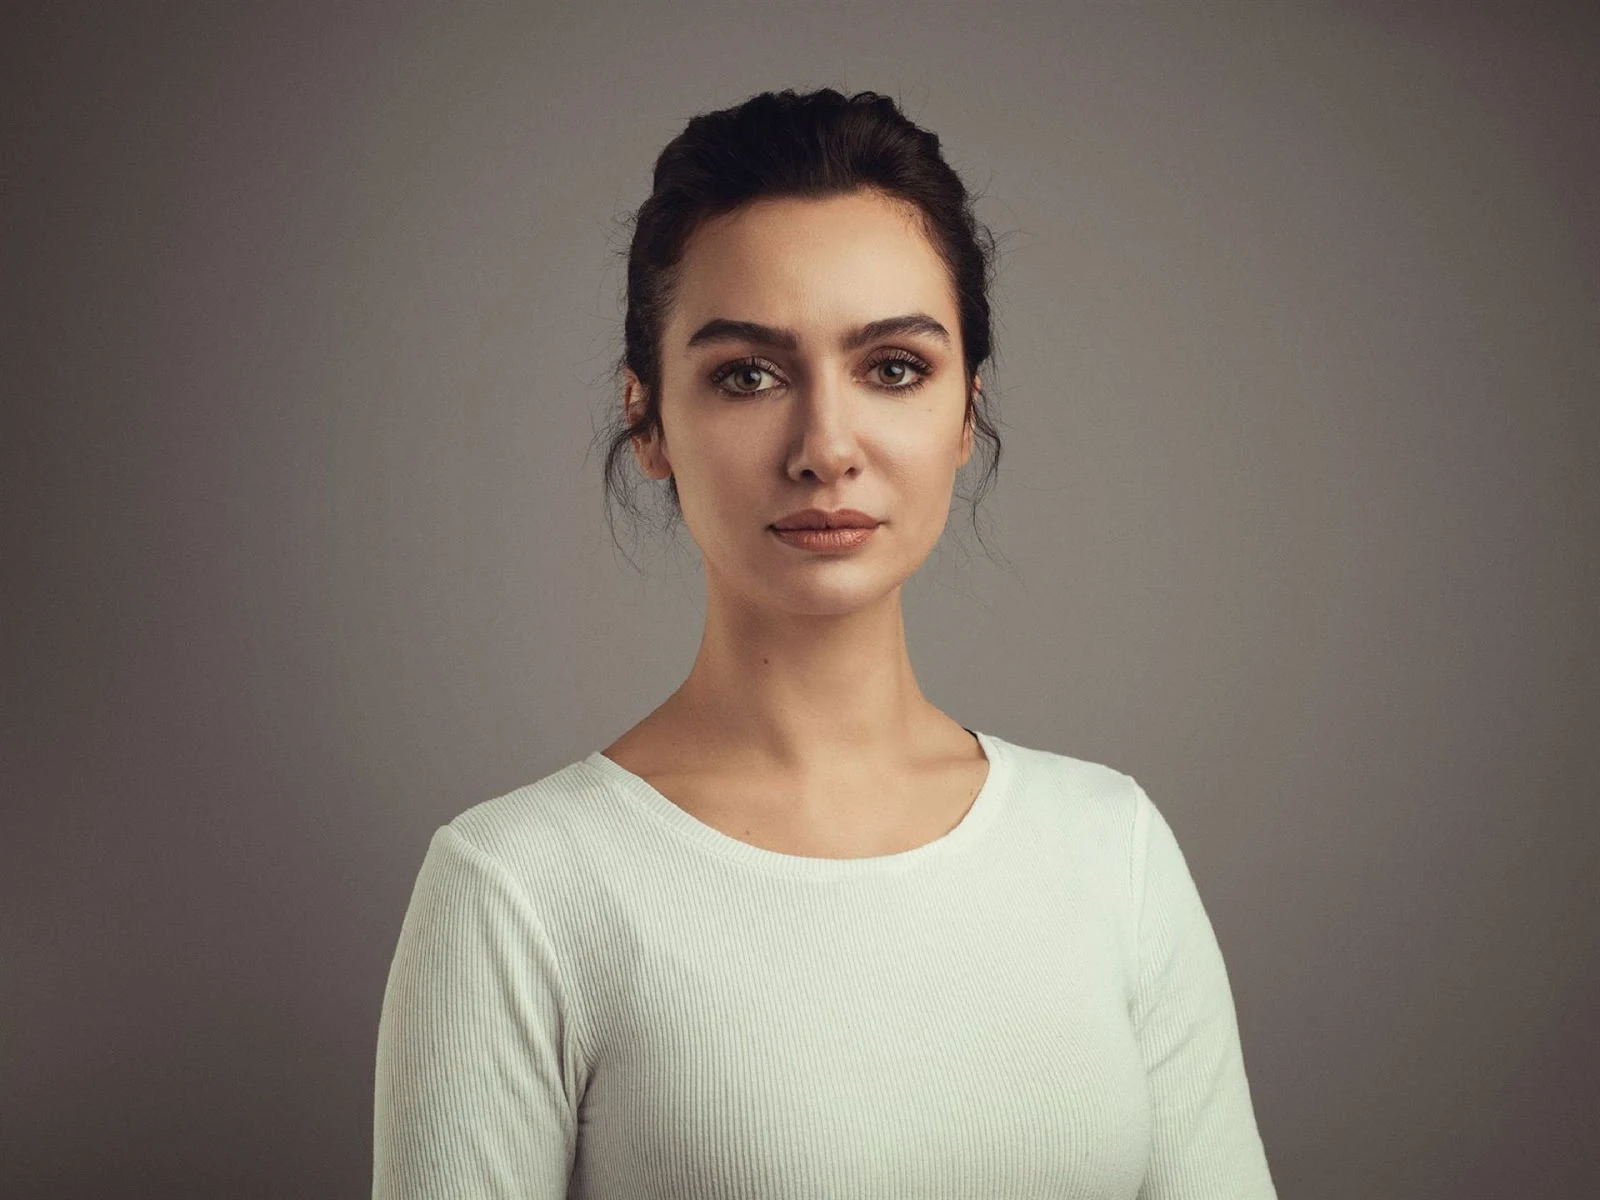 As Turkey gears up for the presidential elections on May 14th, the call to vote is being echoed by influential personalities, including actress Birce Akalay. Taking to Twitter, Akalay urged her followers to exercise their right to vote, stressing the importance and value of each vote. In a heartfelt video, she reminded viewers that no matter their political leanings, they must come together and take responsibility for their vote. With the election being one of the most crucial in the country's history, Akalay urged her followers to join her in supporting democracy and taking ownership of their vote.